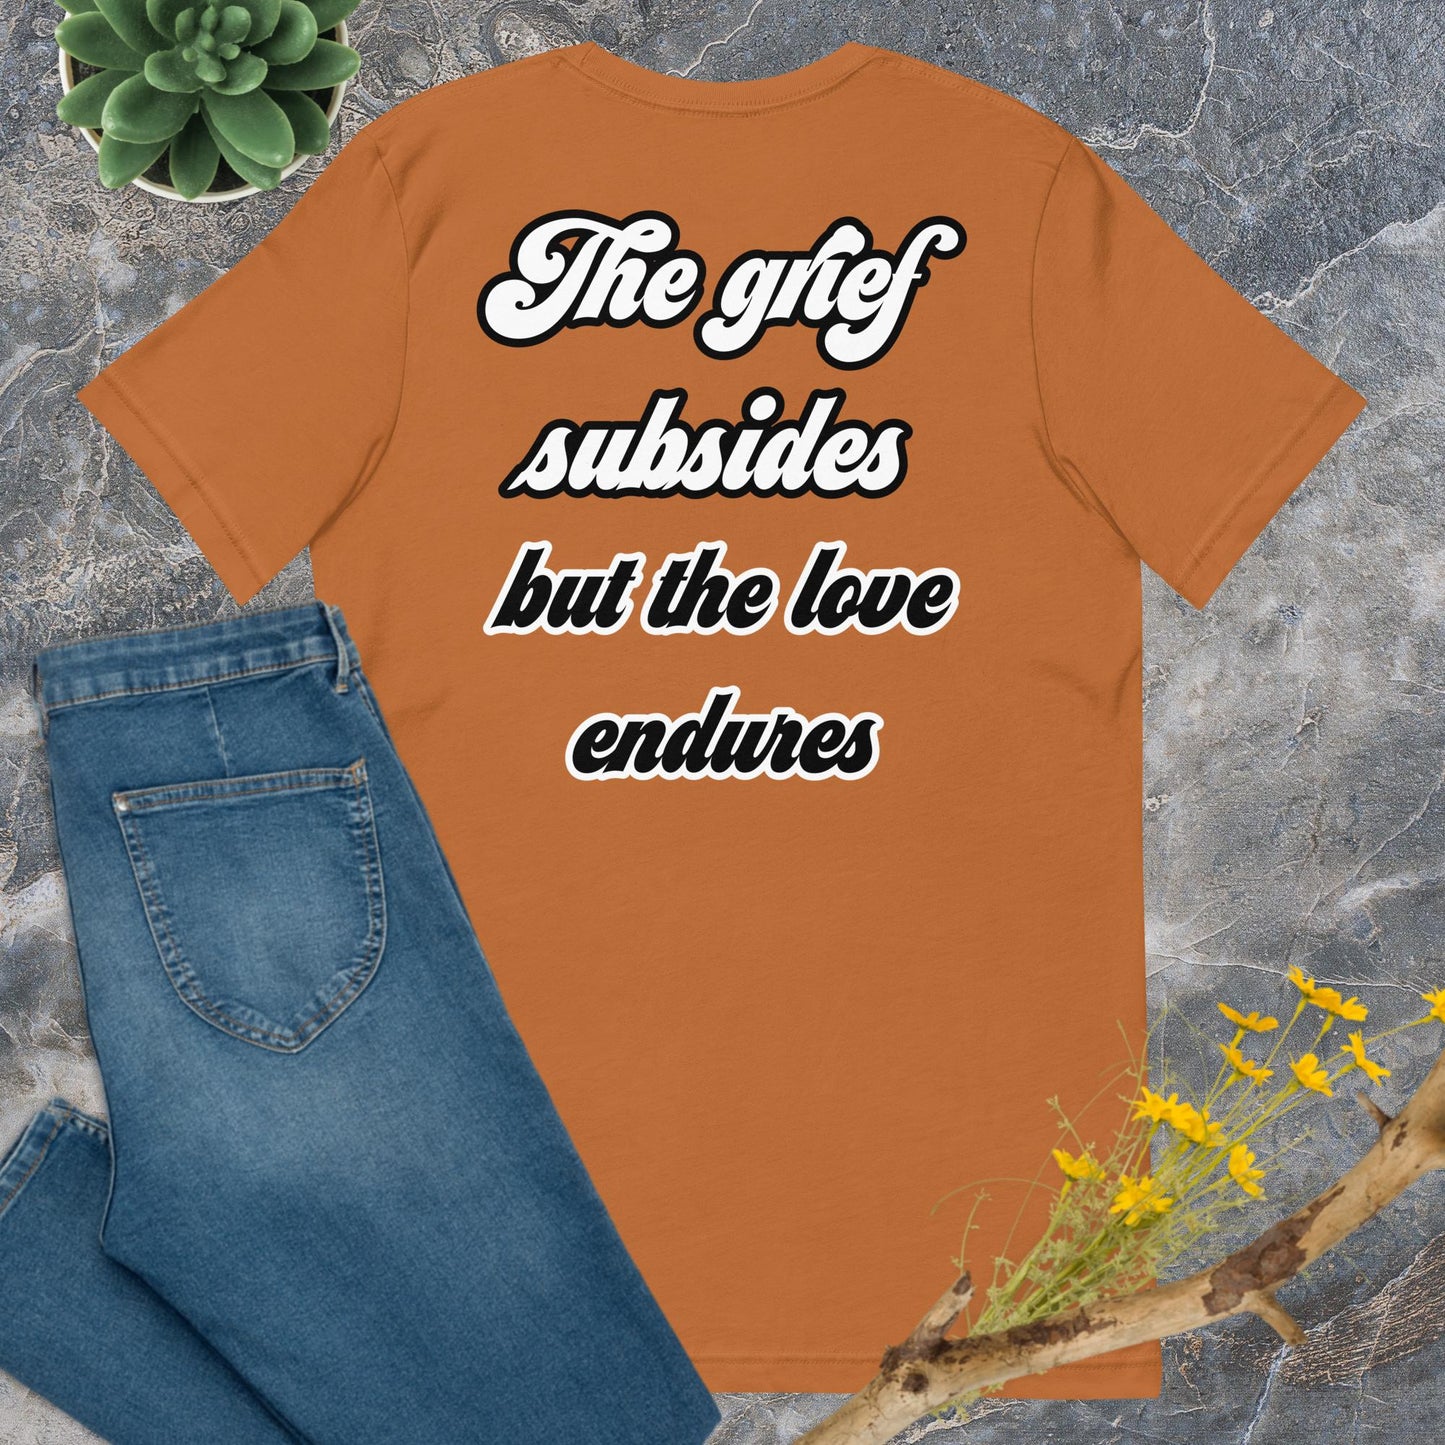 Bella + Canvas 3001 t-shirt. Toast colored (orange/brown), back view. White and black scripted written quote "The grief subsides but the love endures." Shown laying flat on grey marble with blue jeans, a green succulent plant, and a brown twig with yellow flowers. Jamilliah's Wisdom Is Timeless Shop - wisdomistimeless.com.